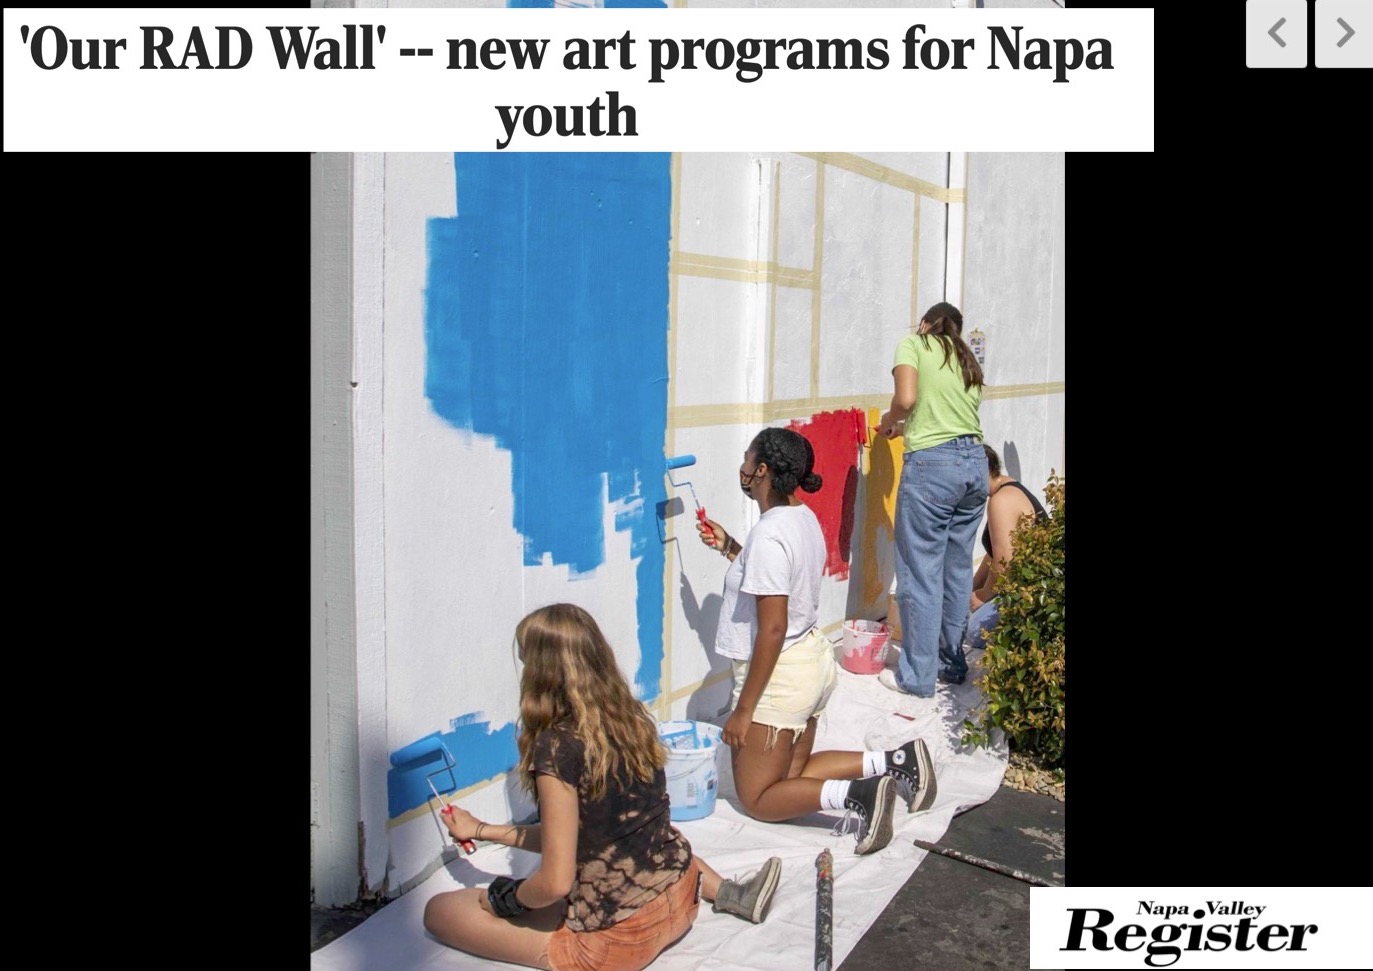 OUR RAD WALL’ – NEW ART PROGRAMS FOR NAPA YOUTH